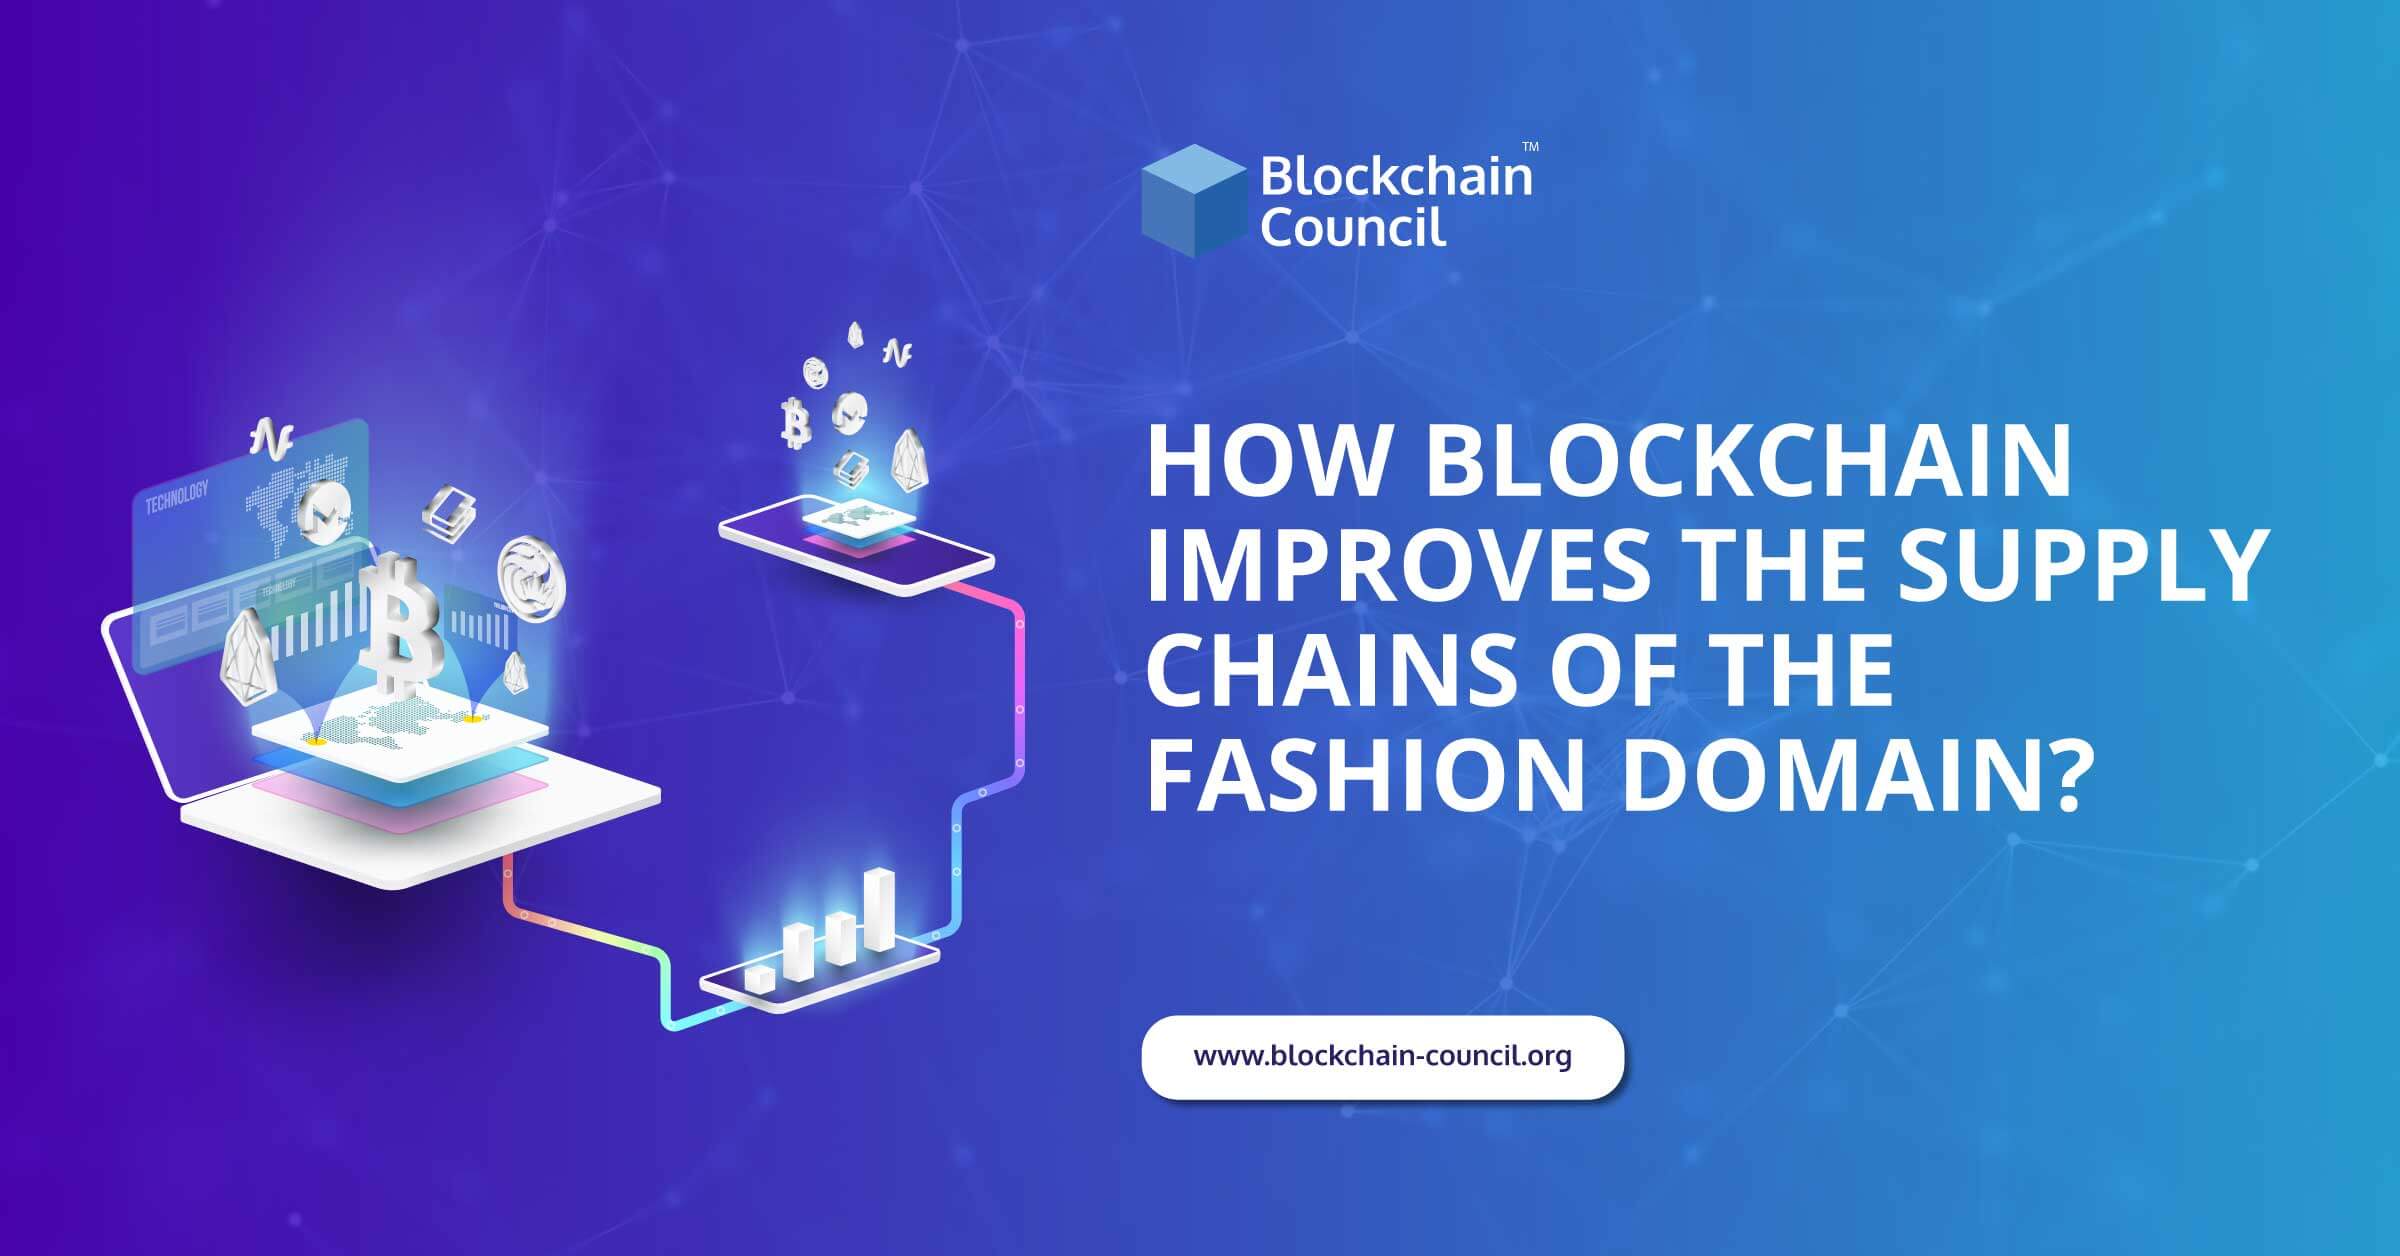 How Blockchain Improves the Supply Chains of the Fashion Domain?